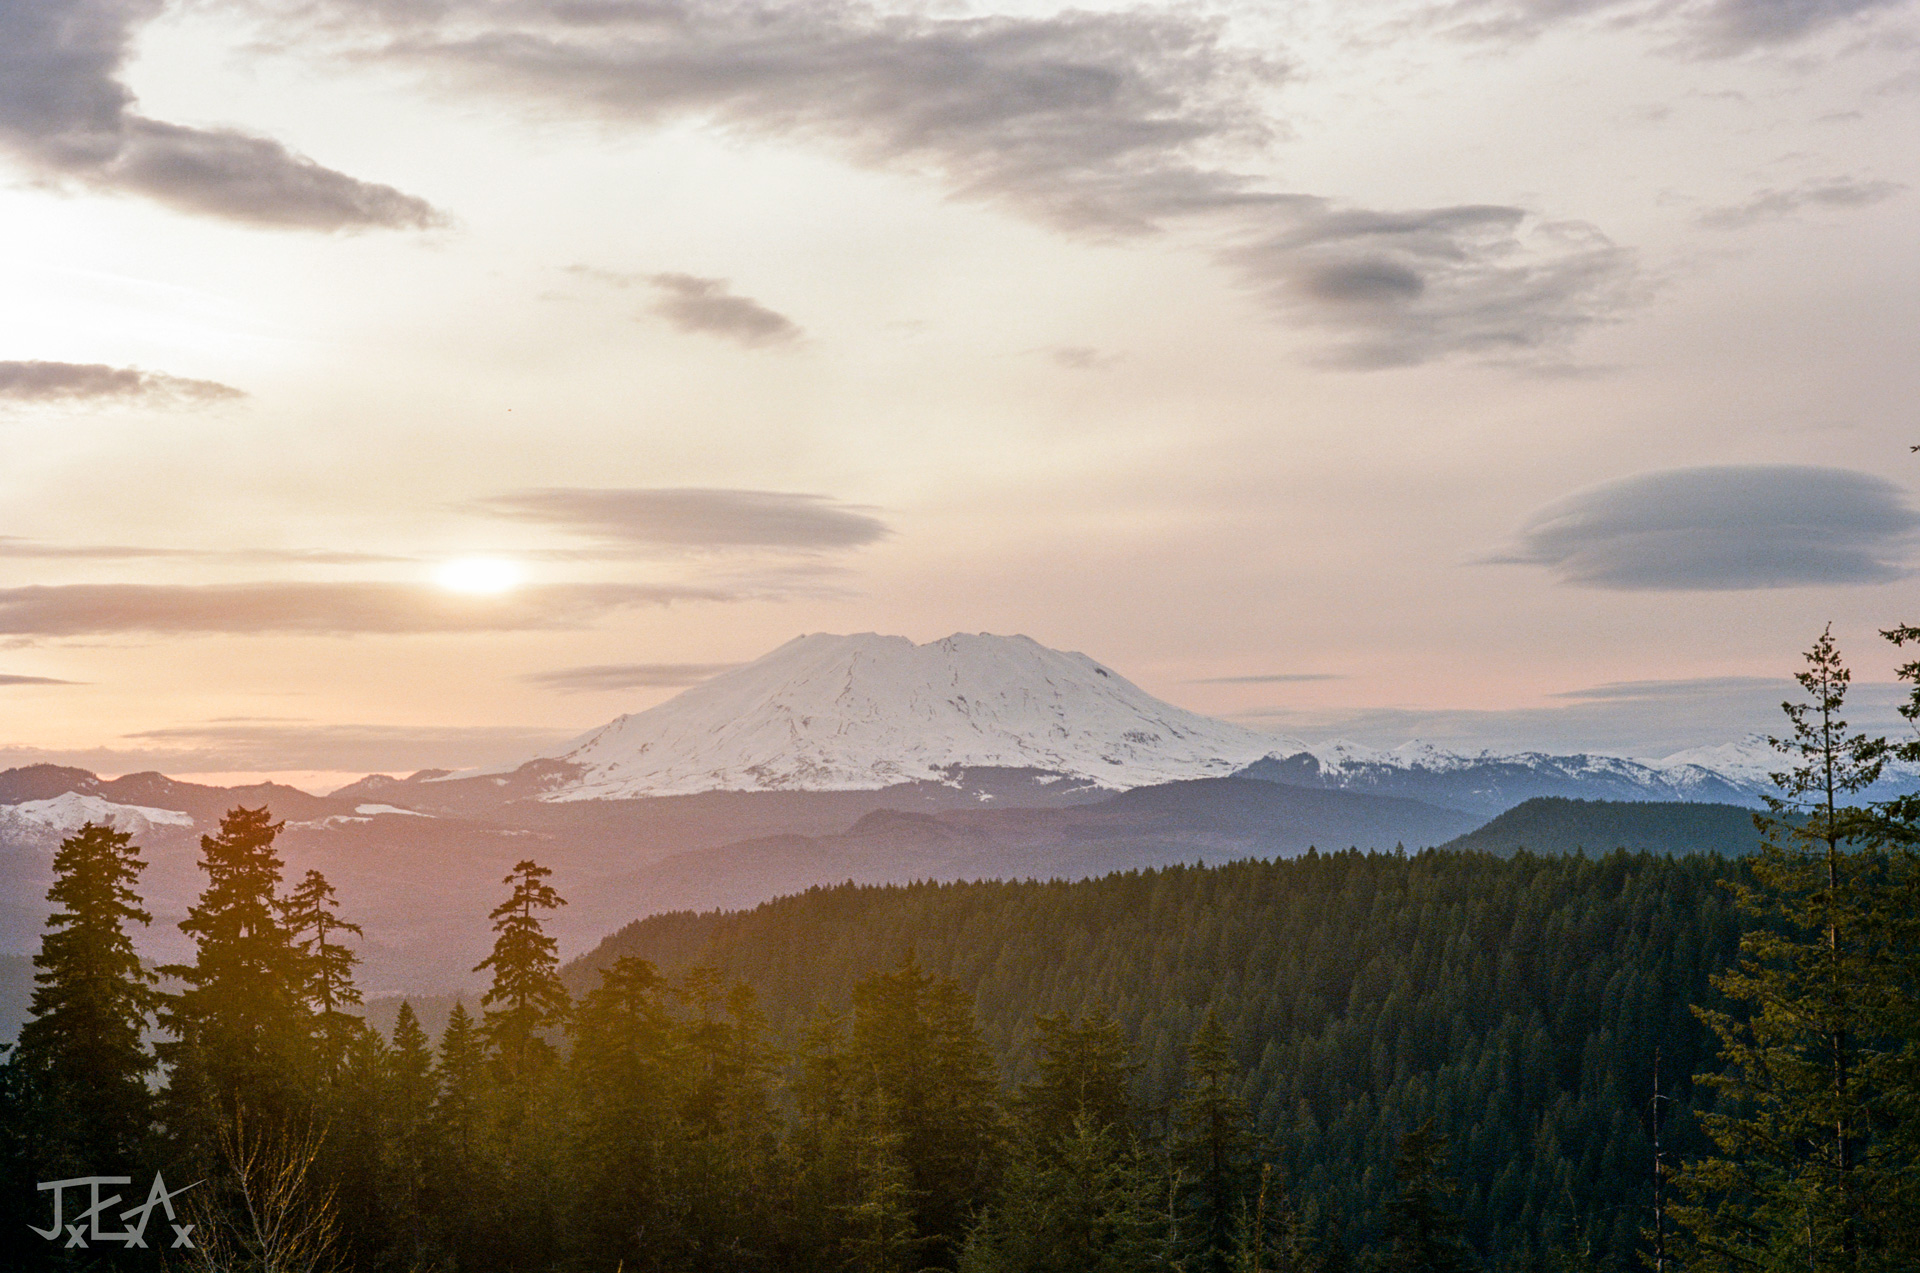 A landscape image of Mt St Helens seen from Mcclellan viewpoint in the Gifford Pinchot National Forest.